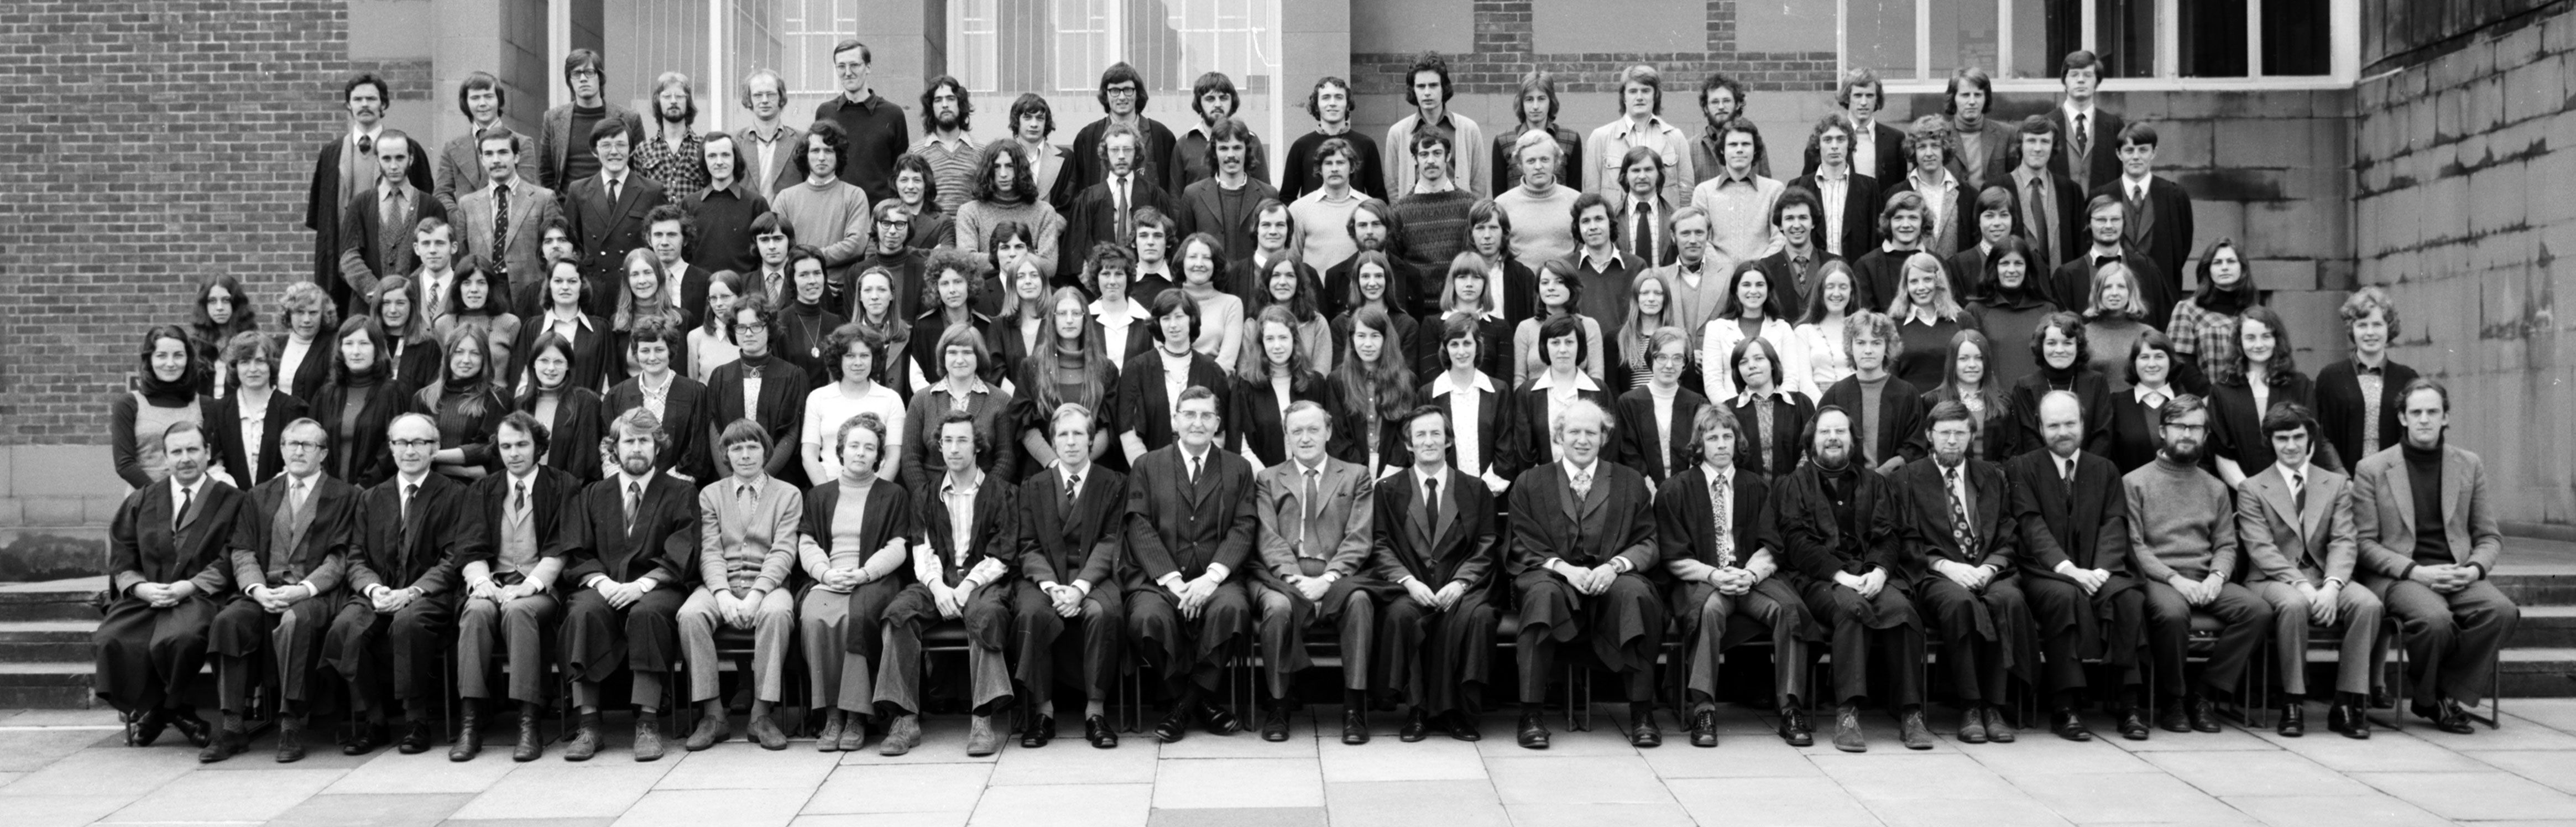 Geography Department Undergraduate Group photo from 1975